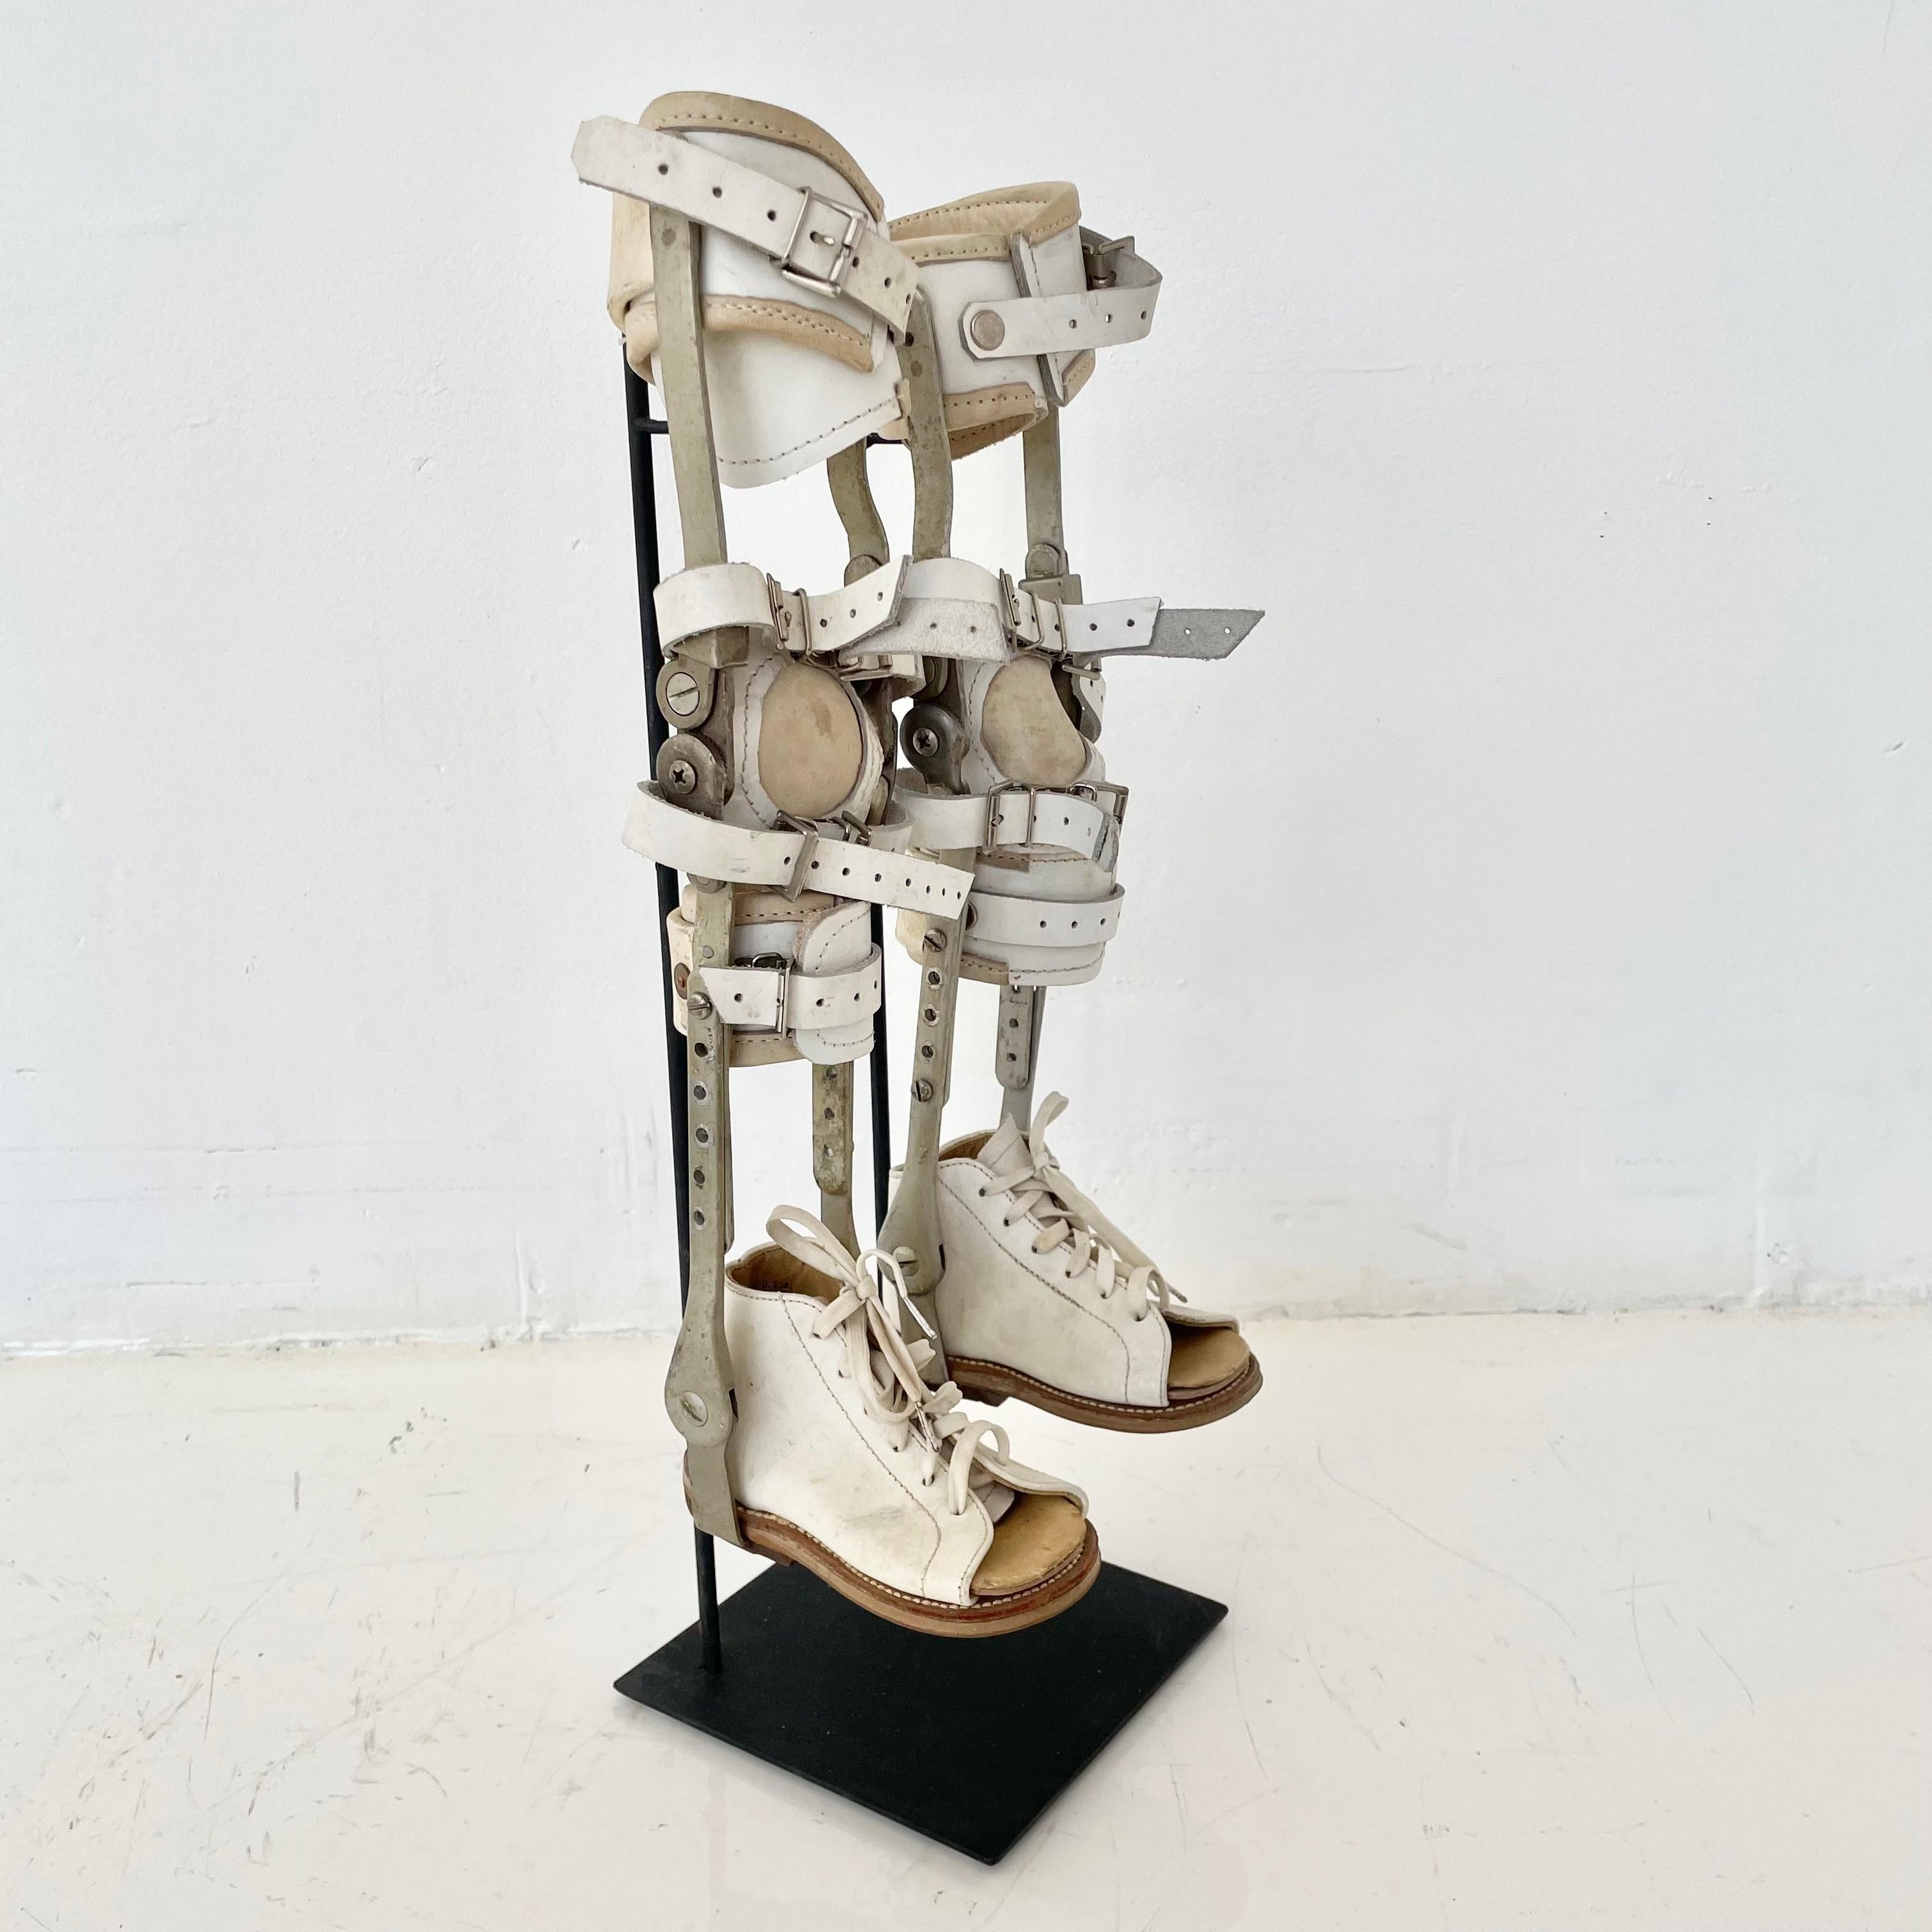 Made in the 1940s, these vintage children's leg braces are an interesting piece of medical history. The leg brace is made from chrome plated steel braces and orthopedic leather. All leather straps and buckles are in good working condition. Large